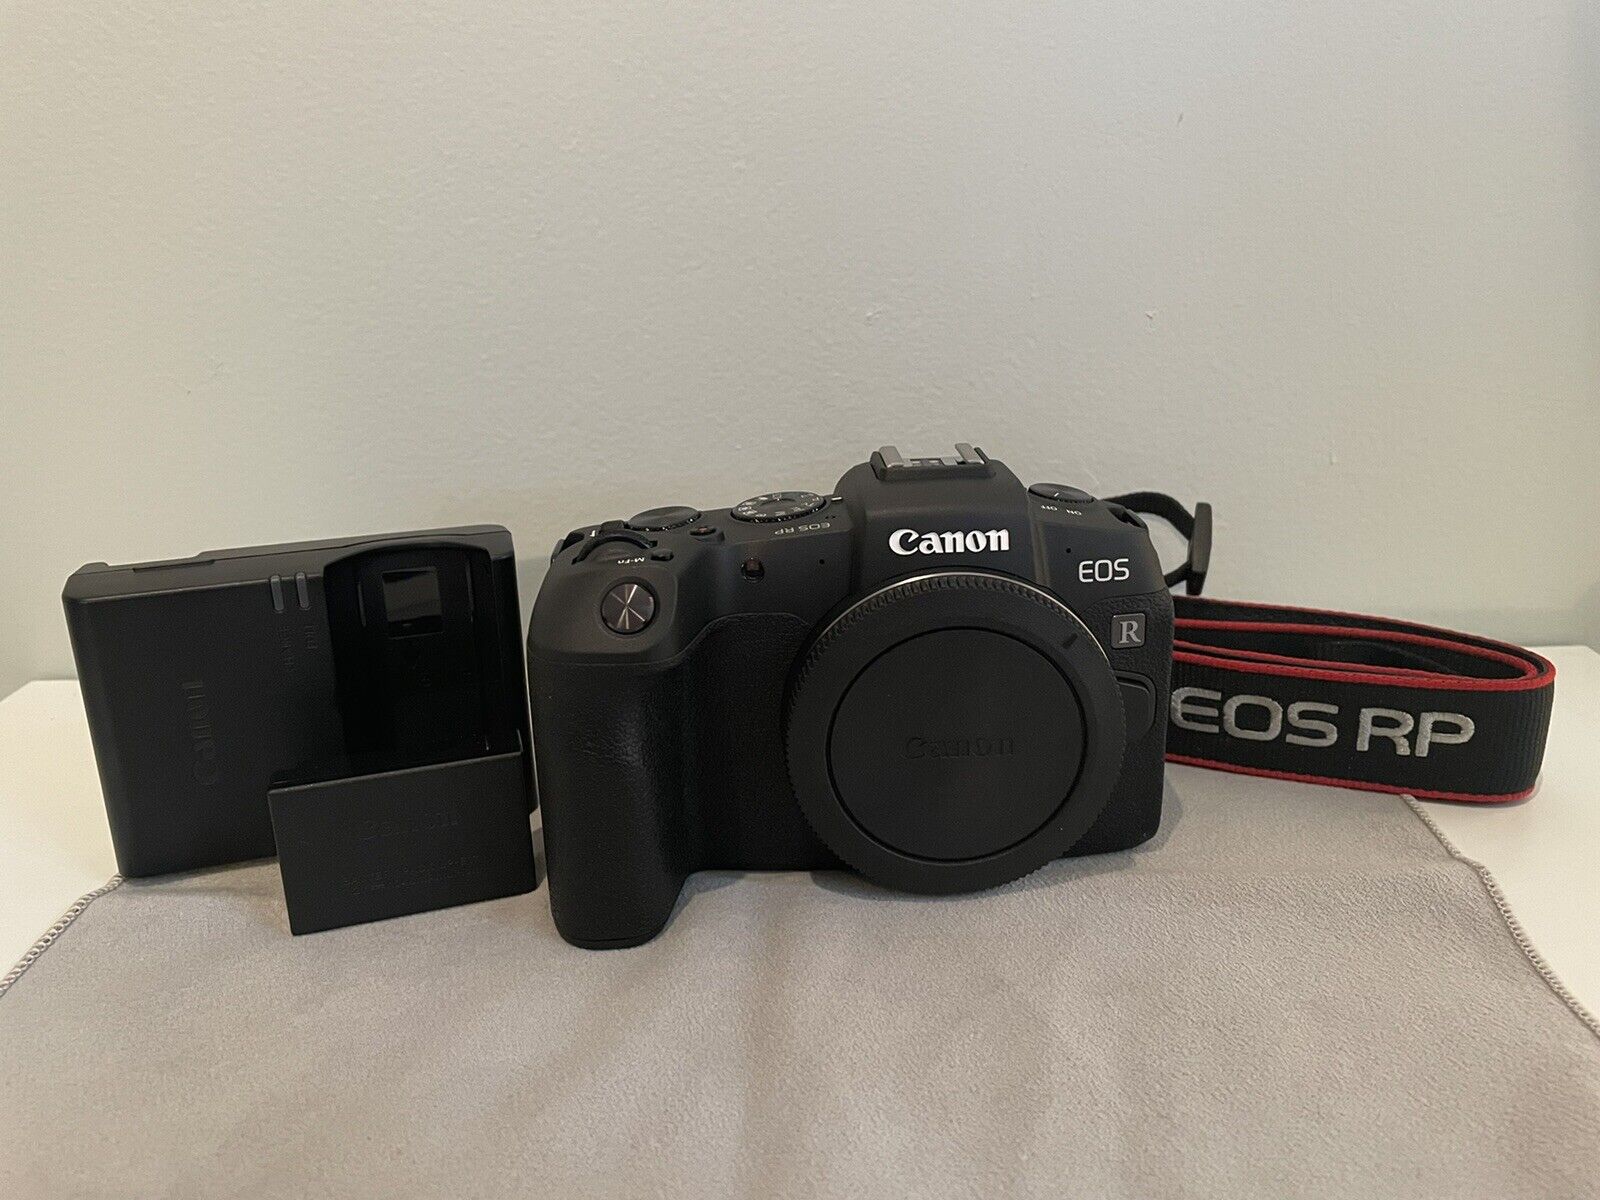 Canon EOS RP 26.2 MP Digital SLR Camera - Black (Body Only) Great Condition